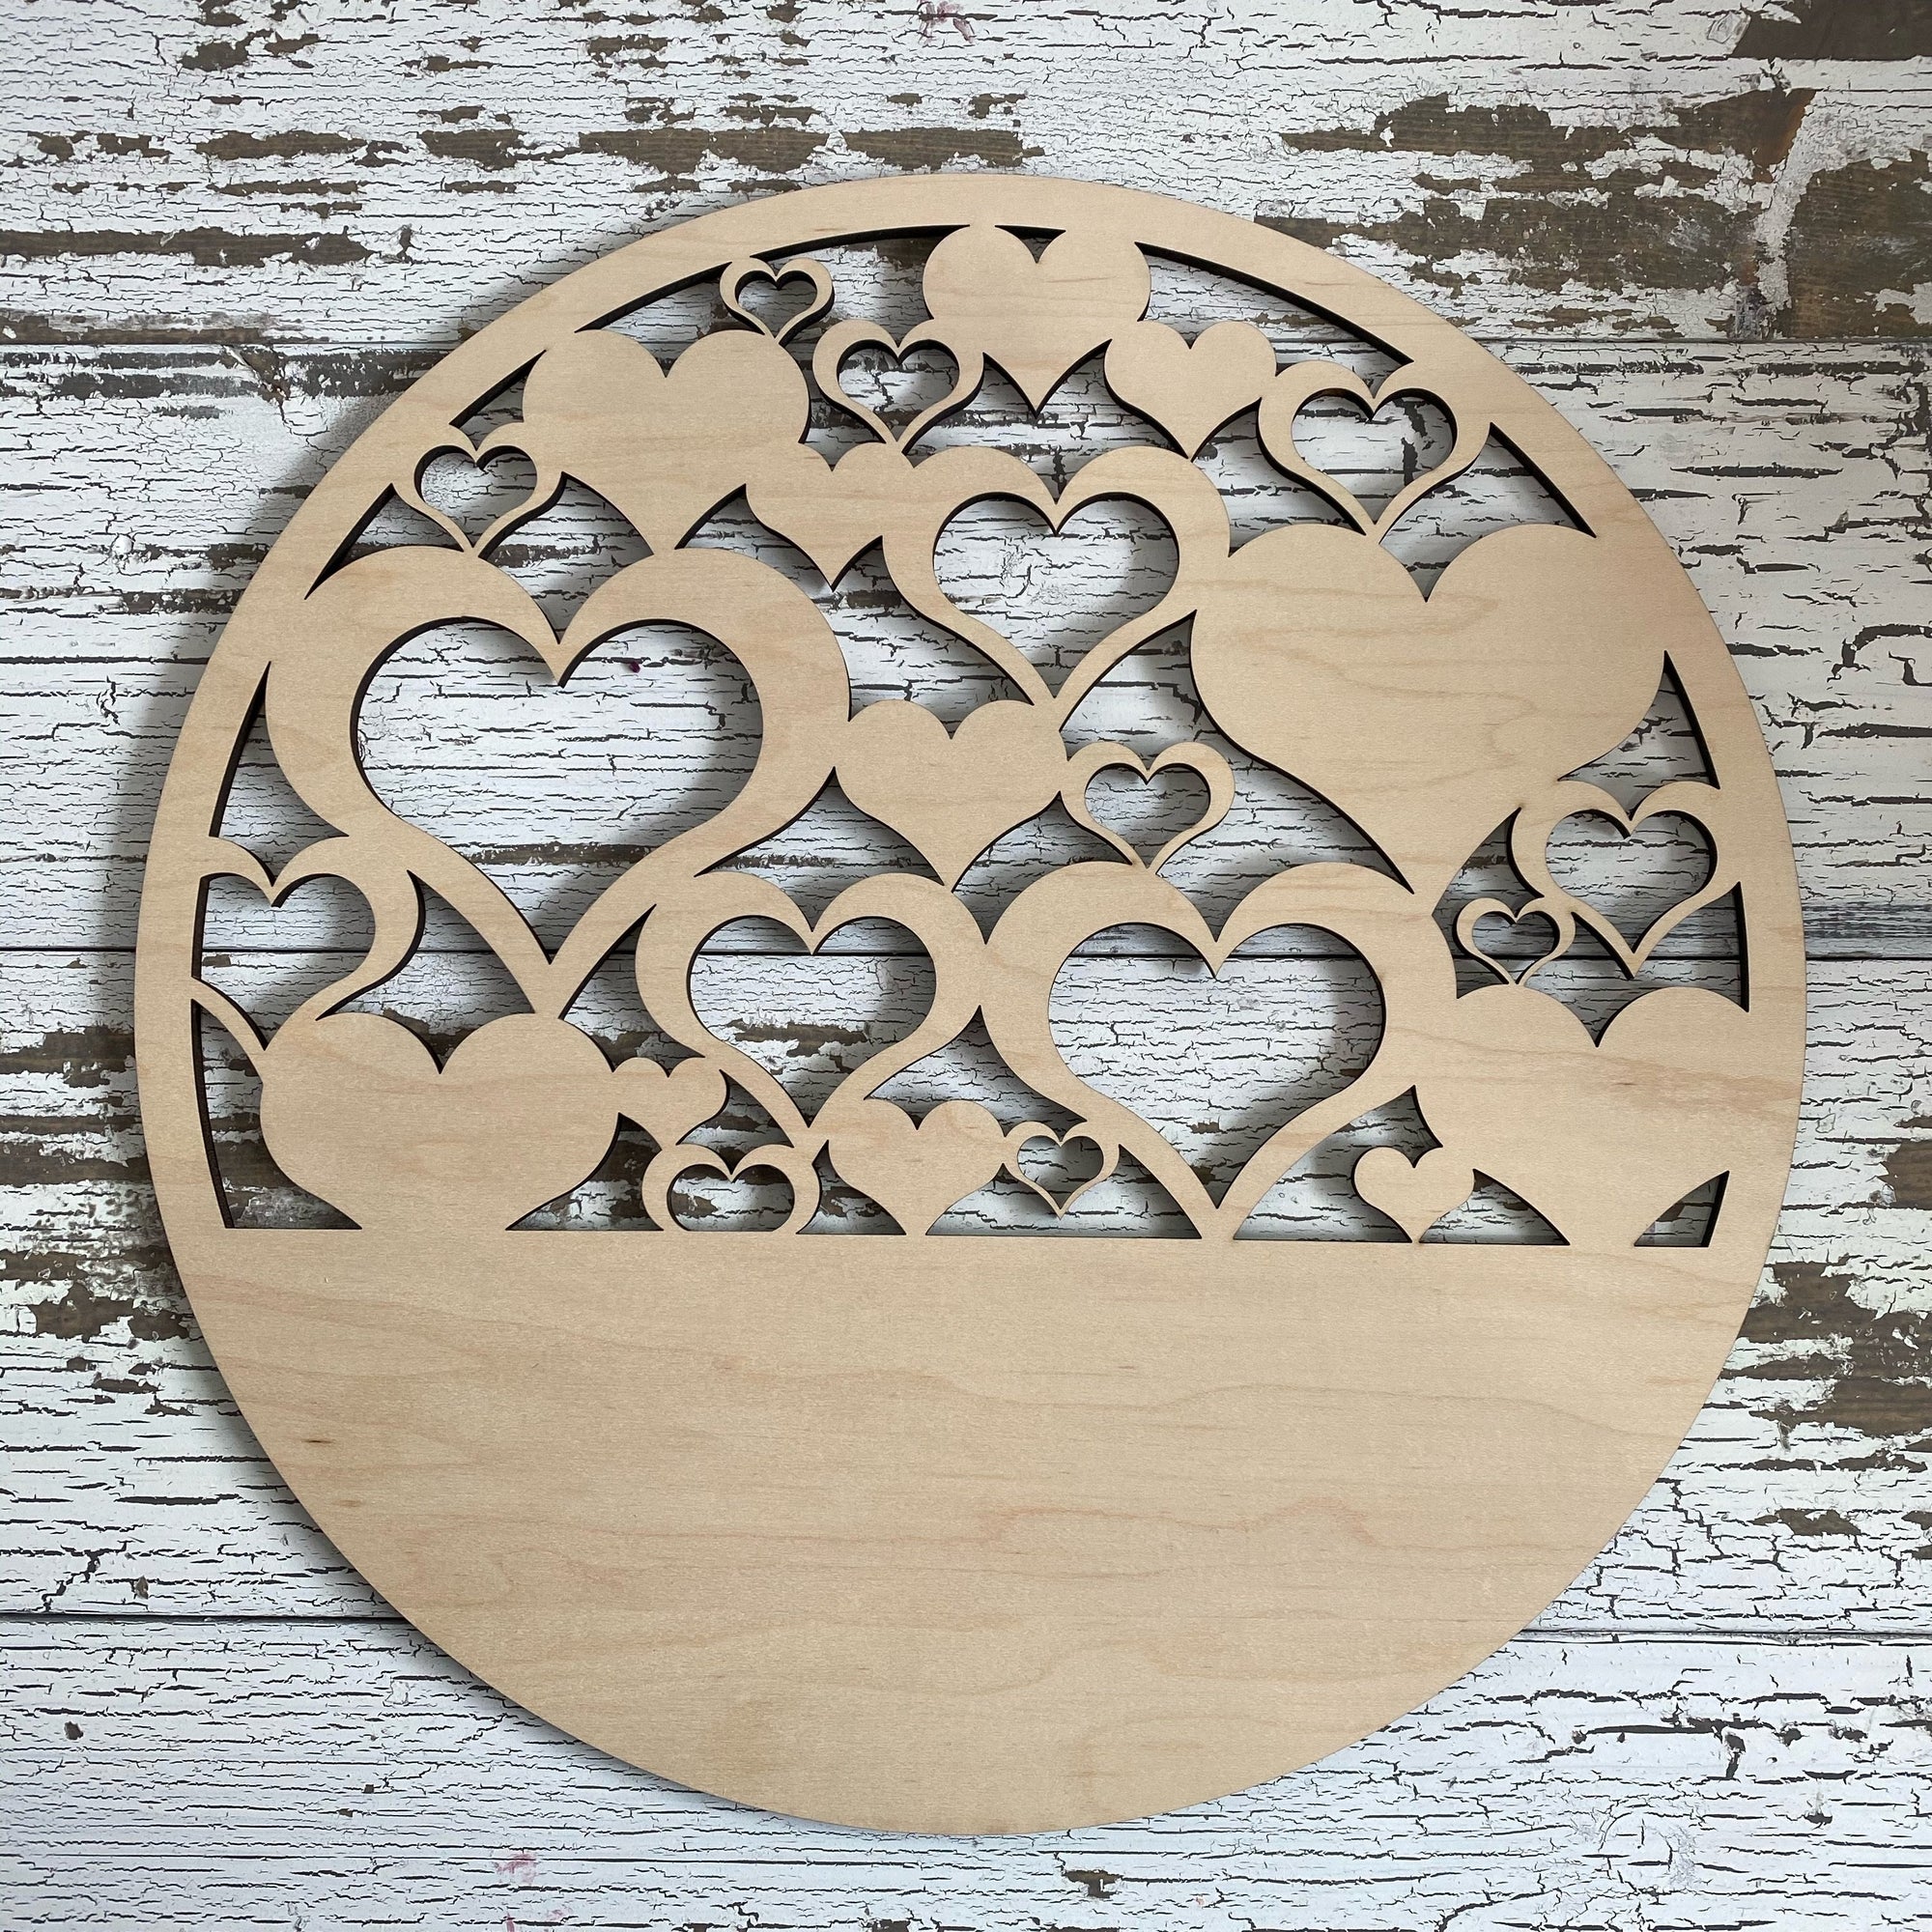 Wooden hearts 2 1/2 inch (2.5) wide 1/4 thick